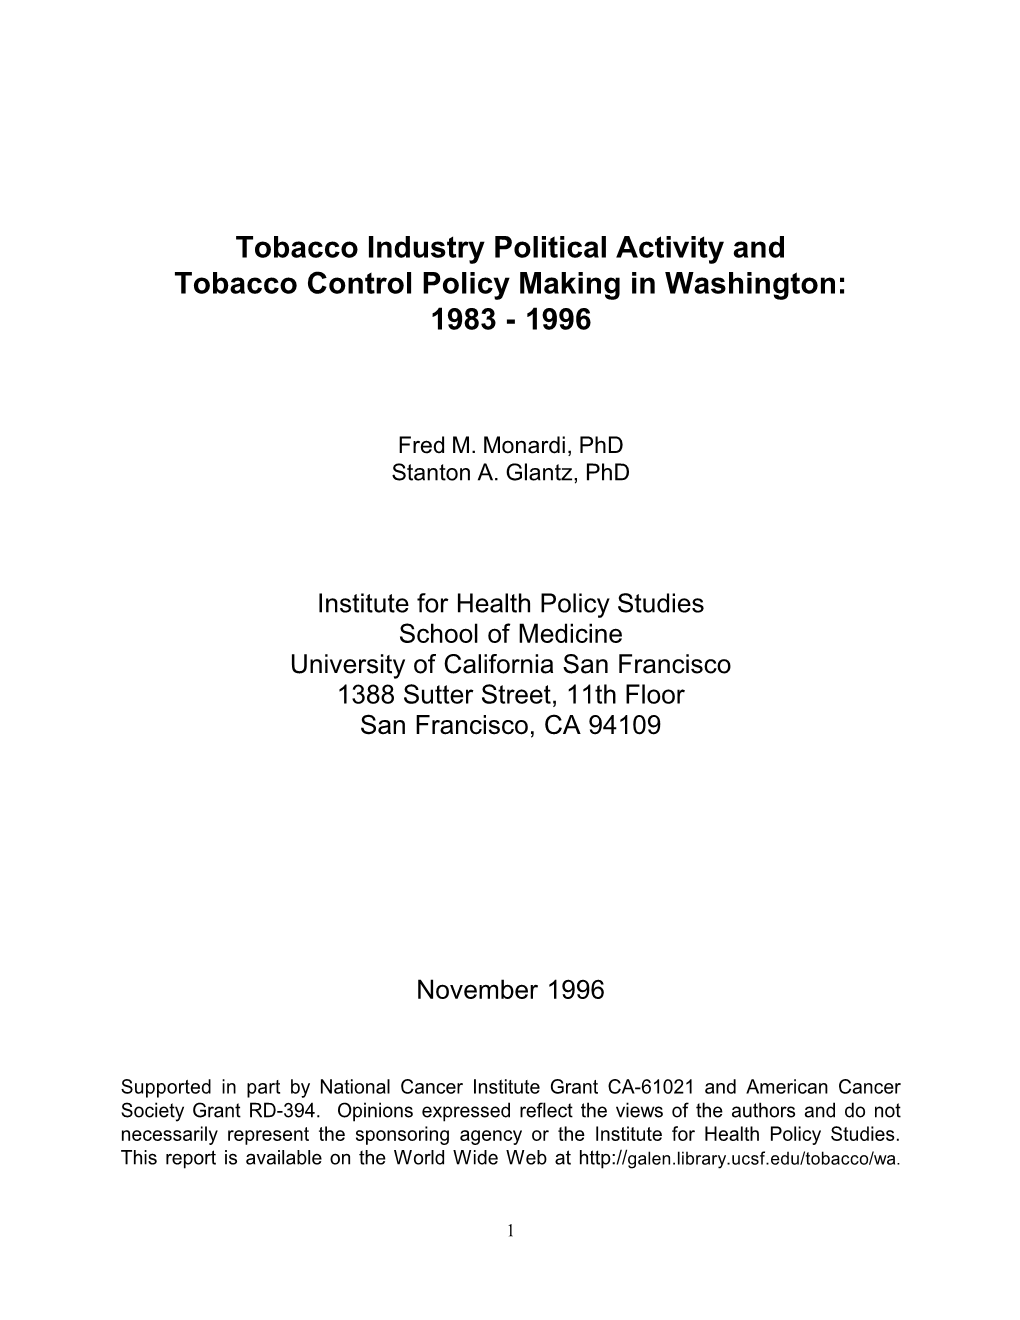 Tobacco Industry Political Activity and Tobacco Control Policy Making in Washington: 1983 - 1996